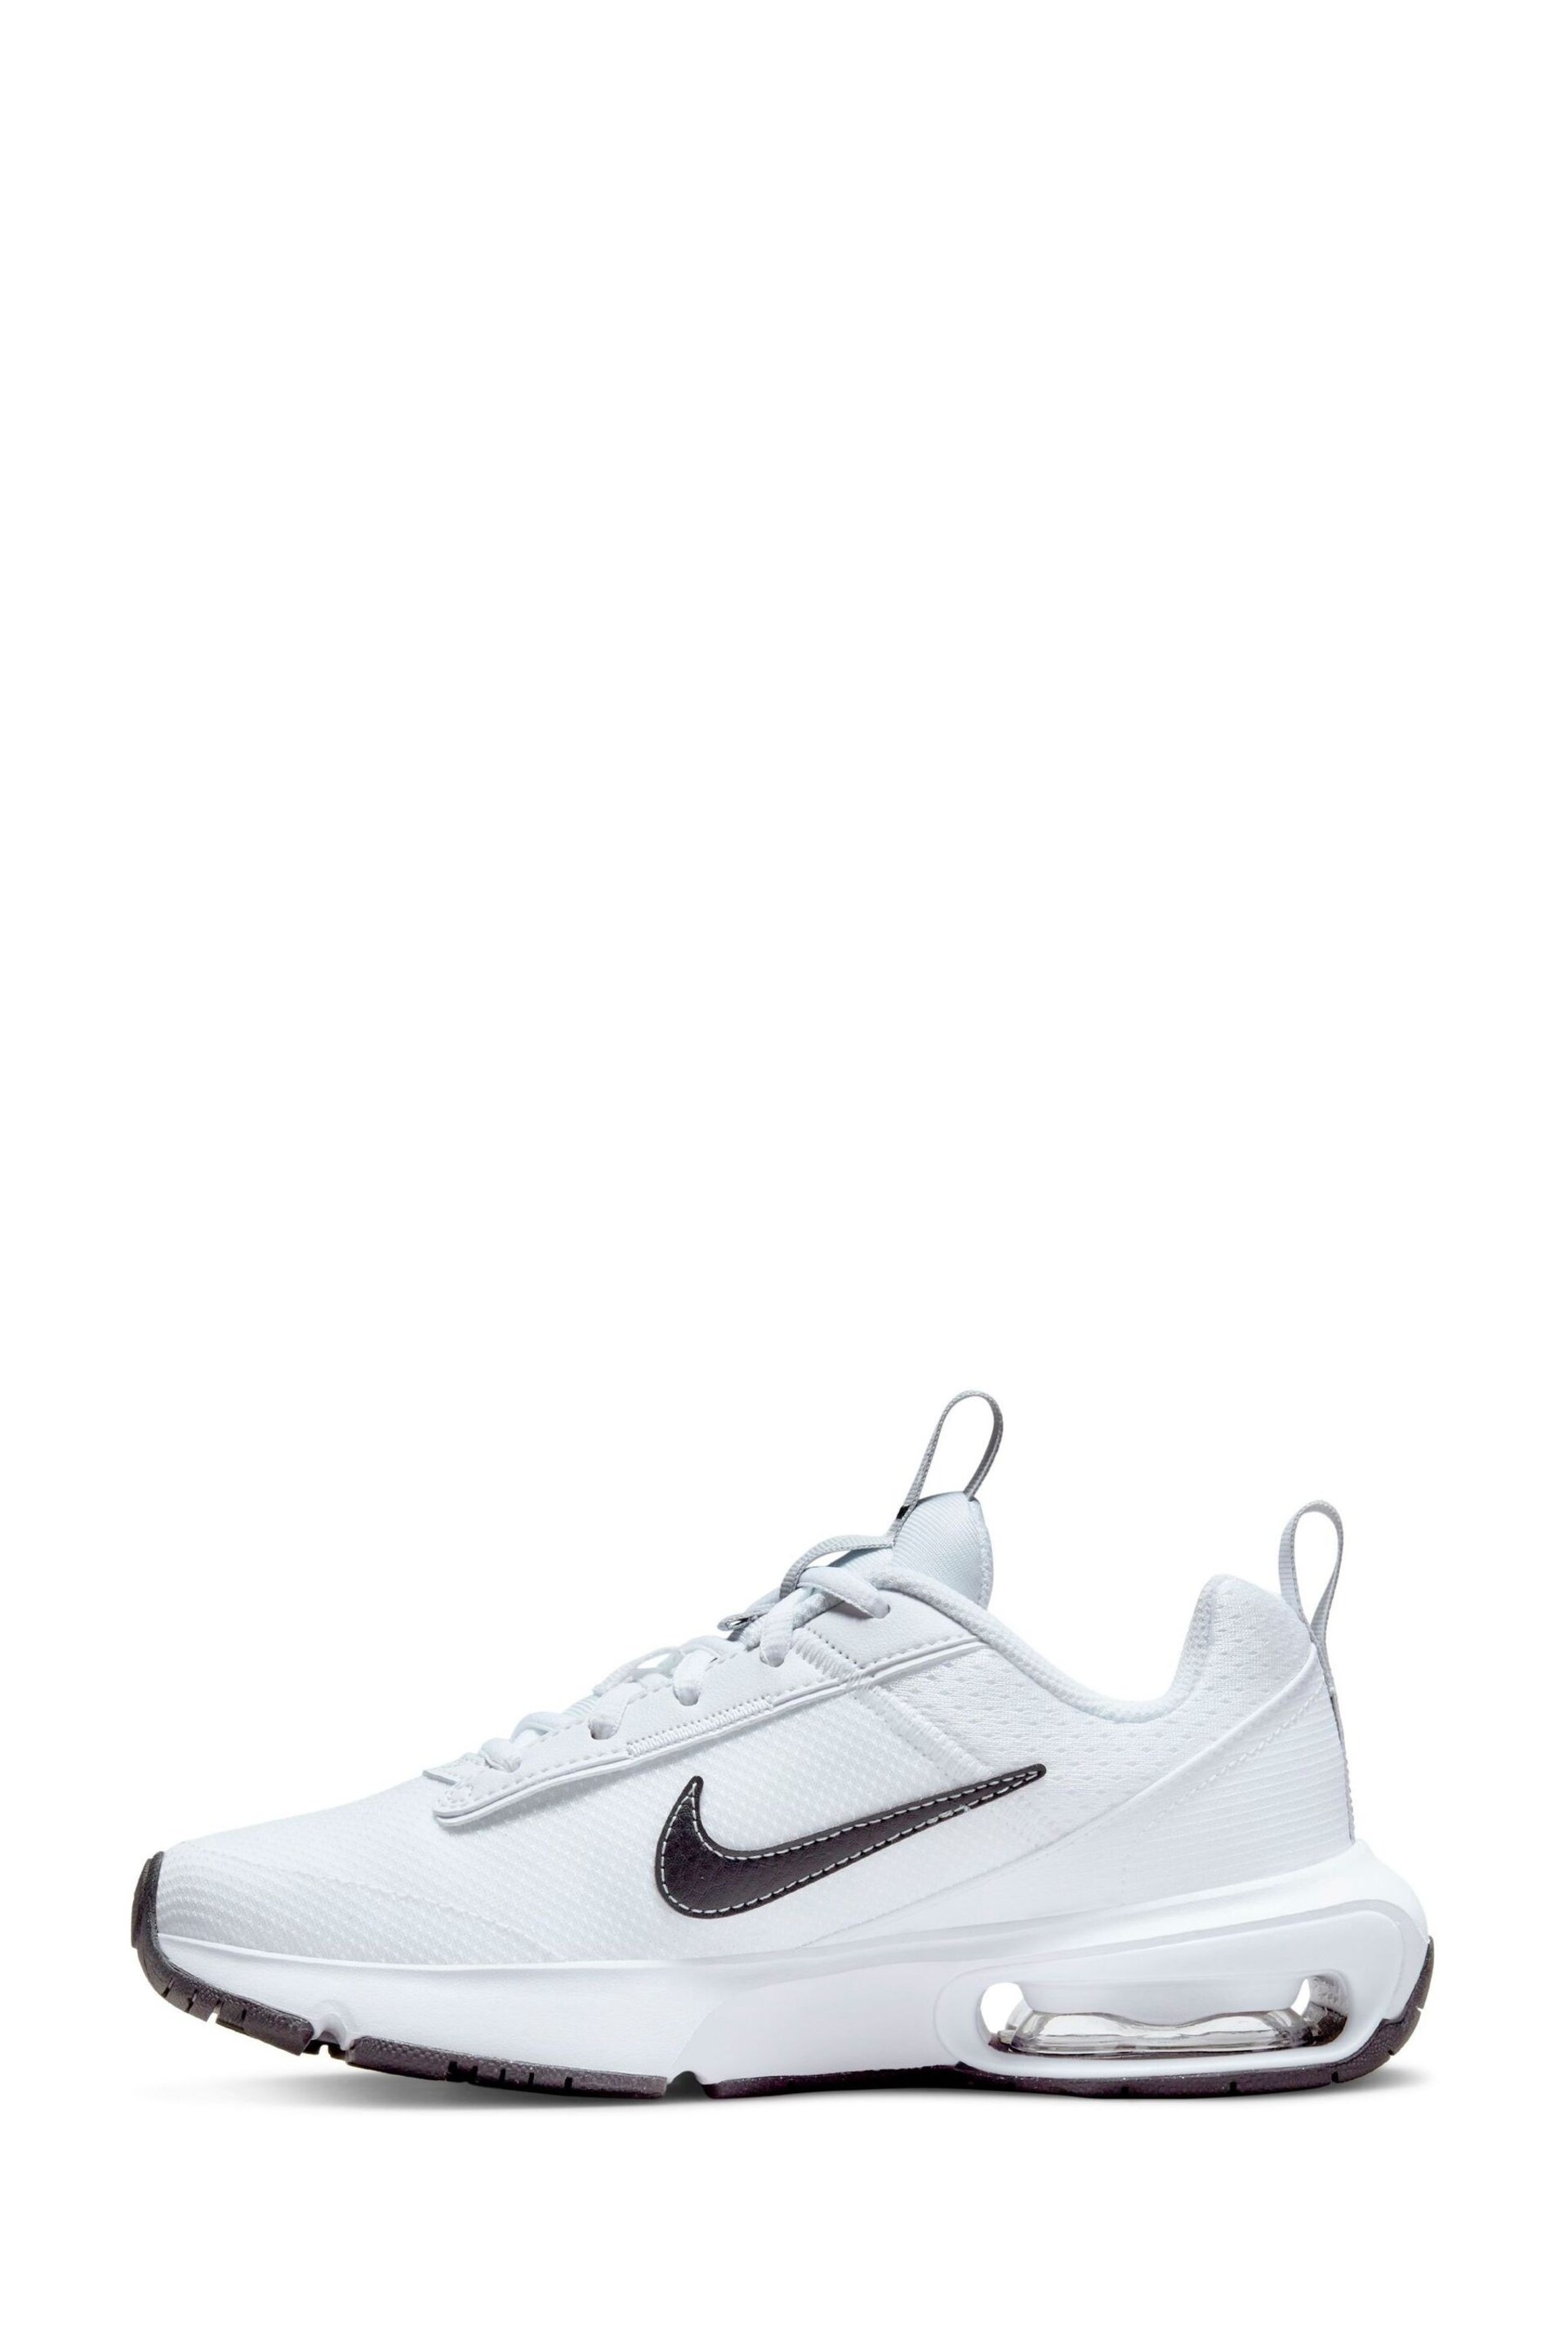 Nike White Youth Air Max INTRLK Lite Trainers - Image 2 of 10